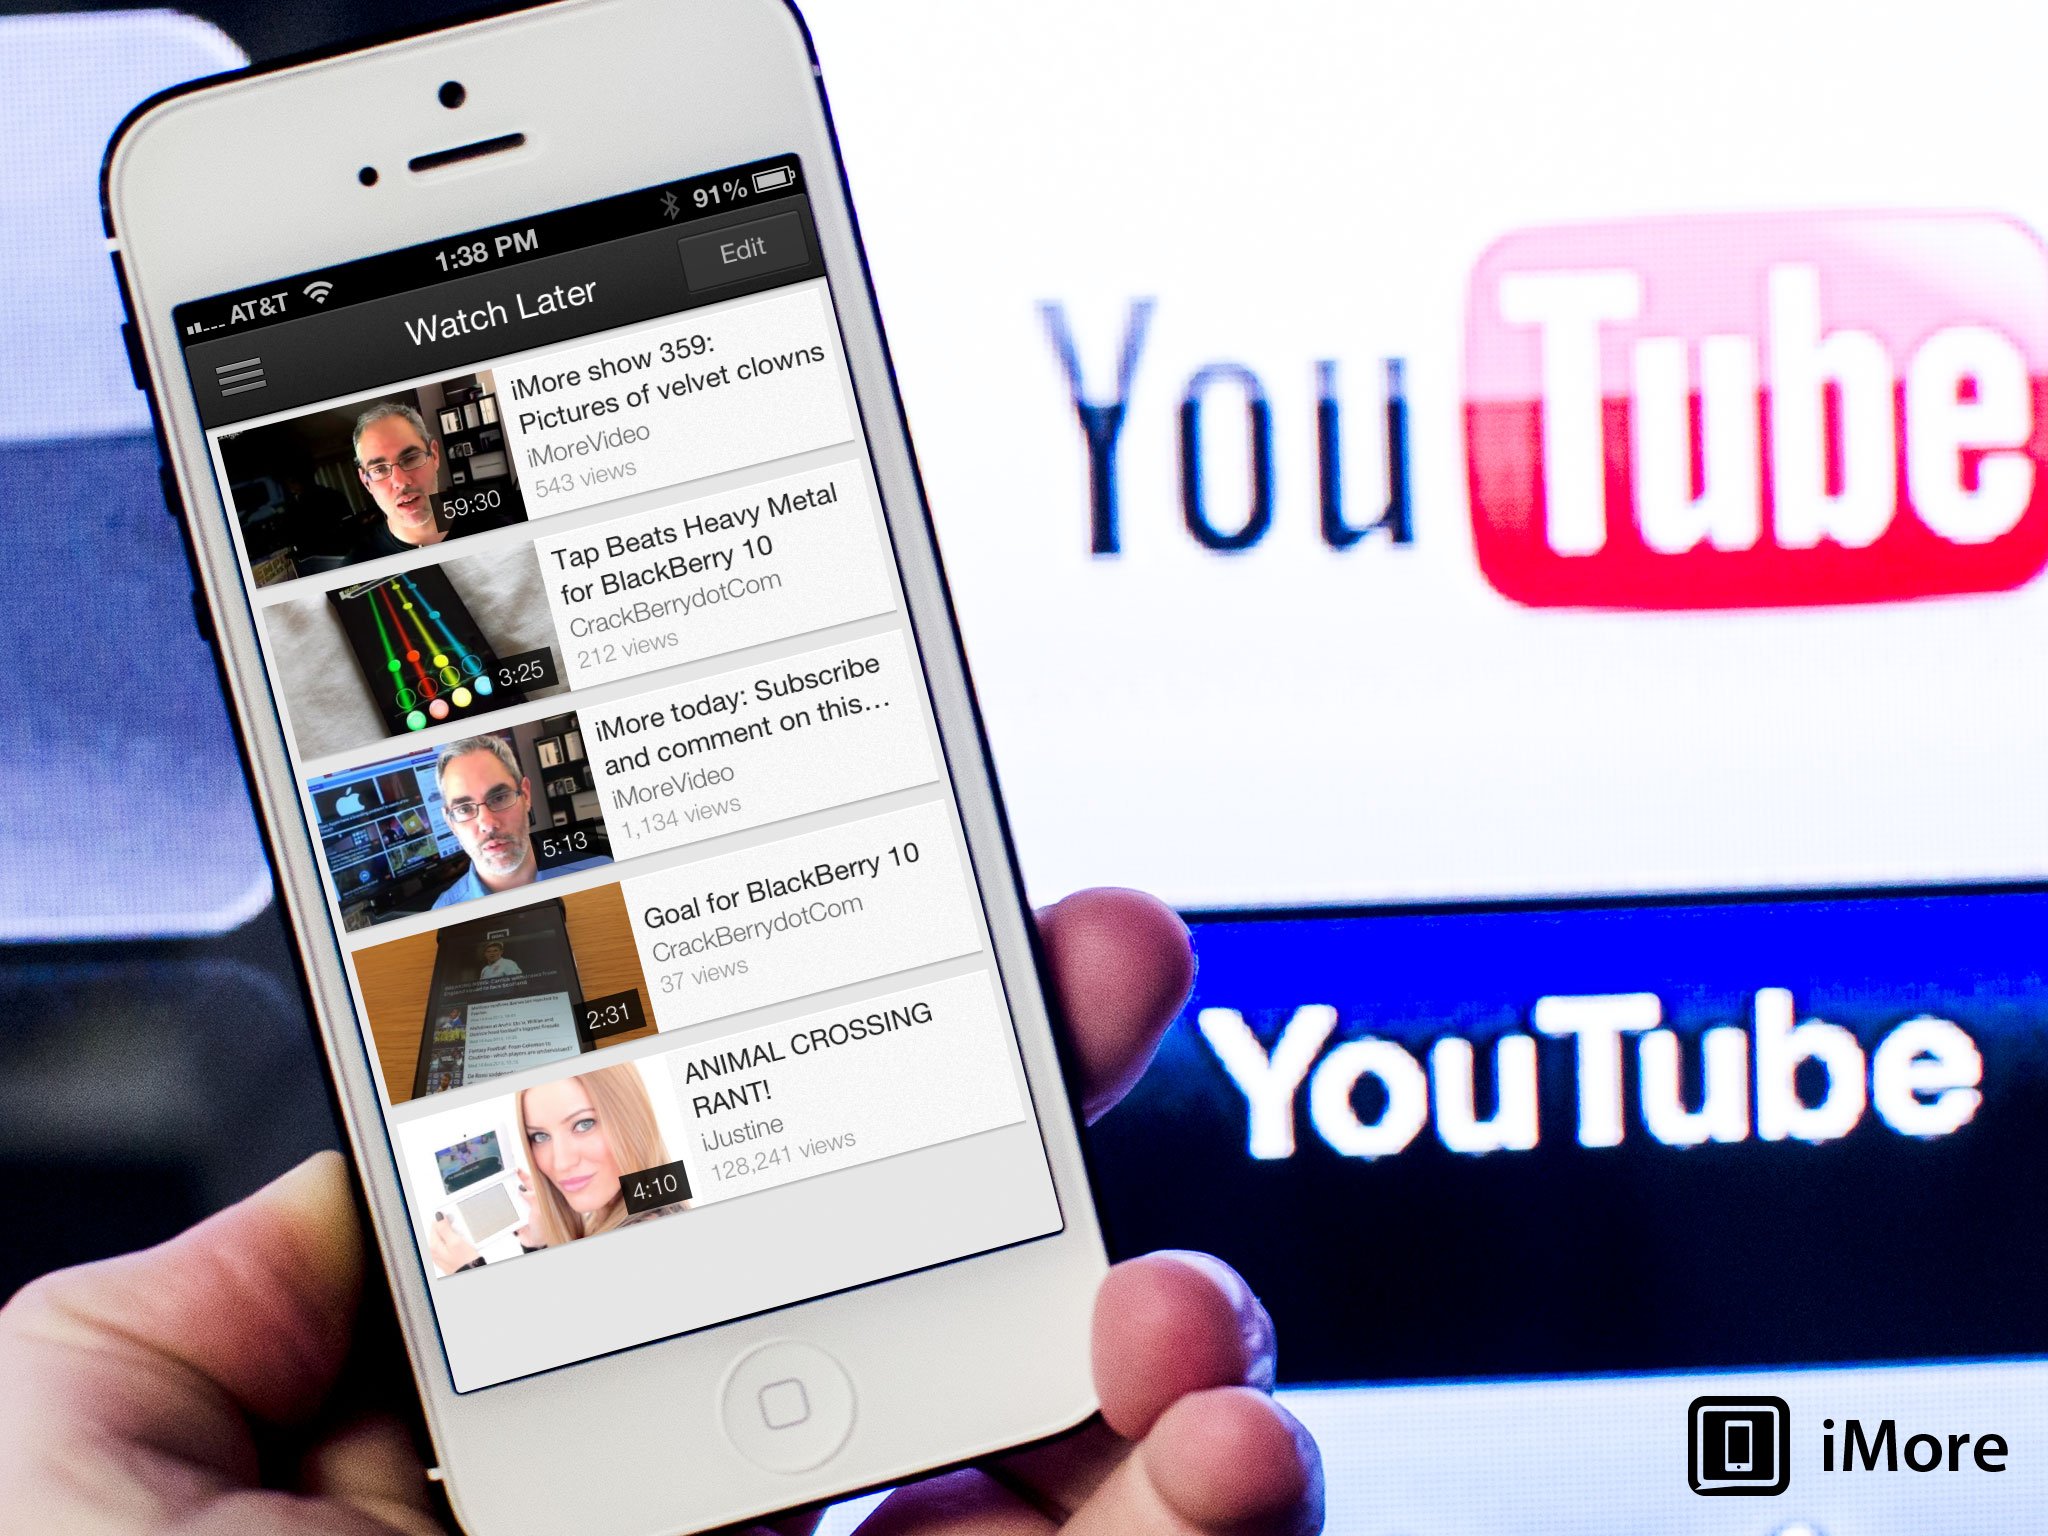 How to add a video to the Watch Later list in YouTube for iOS